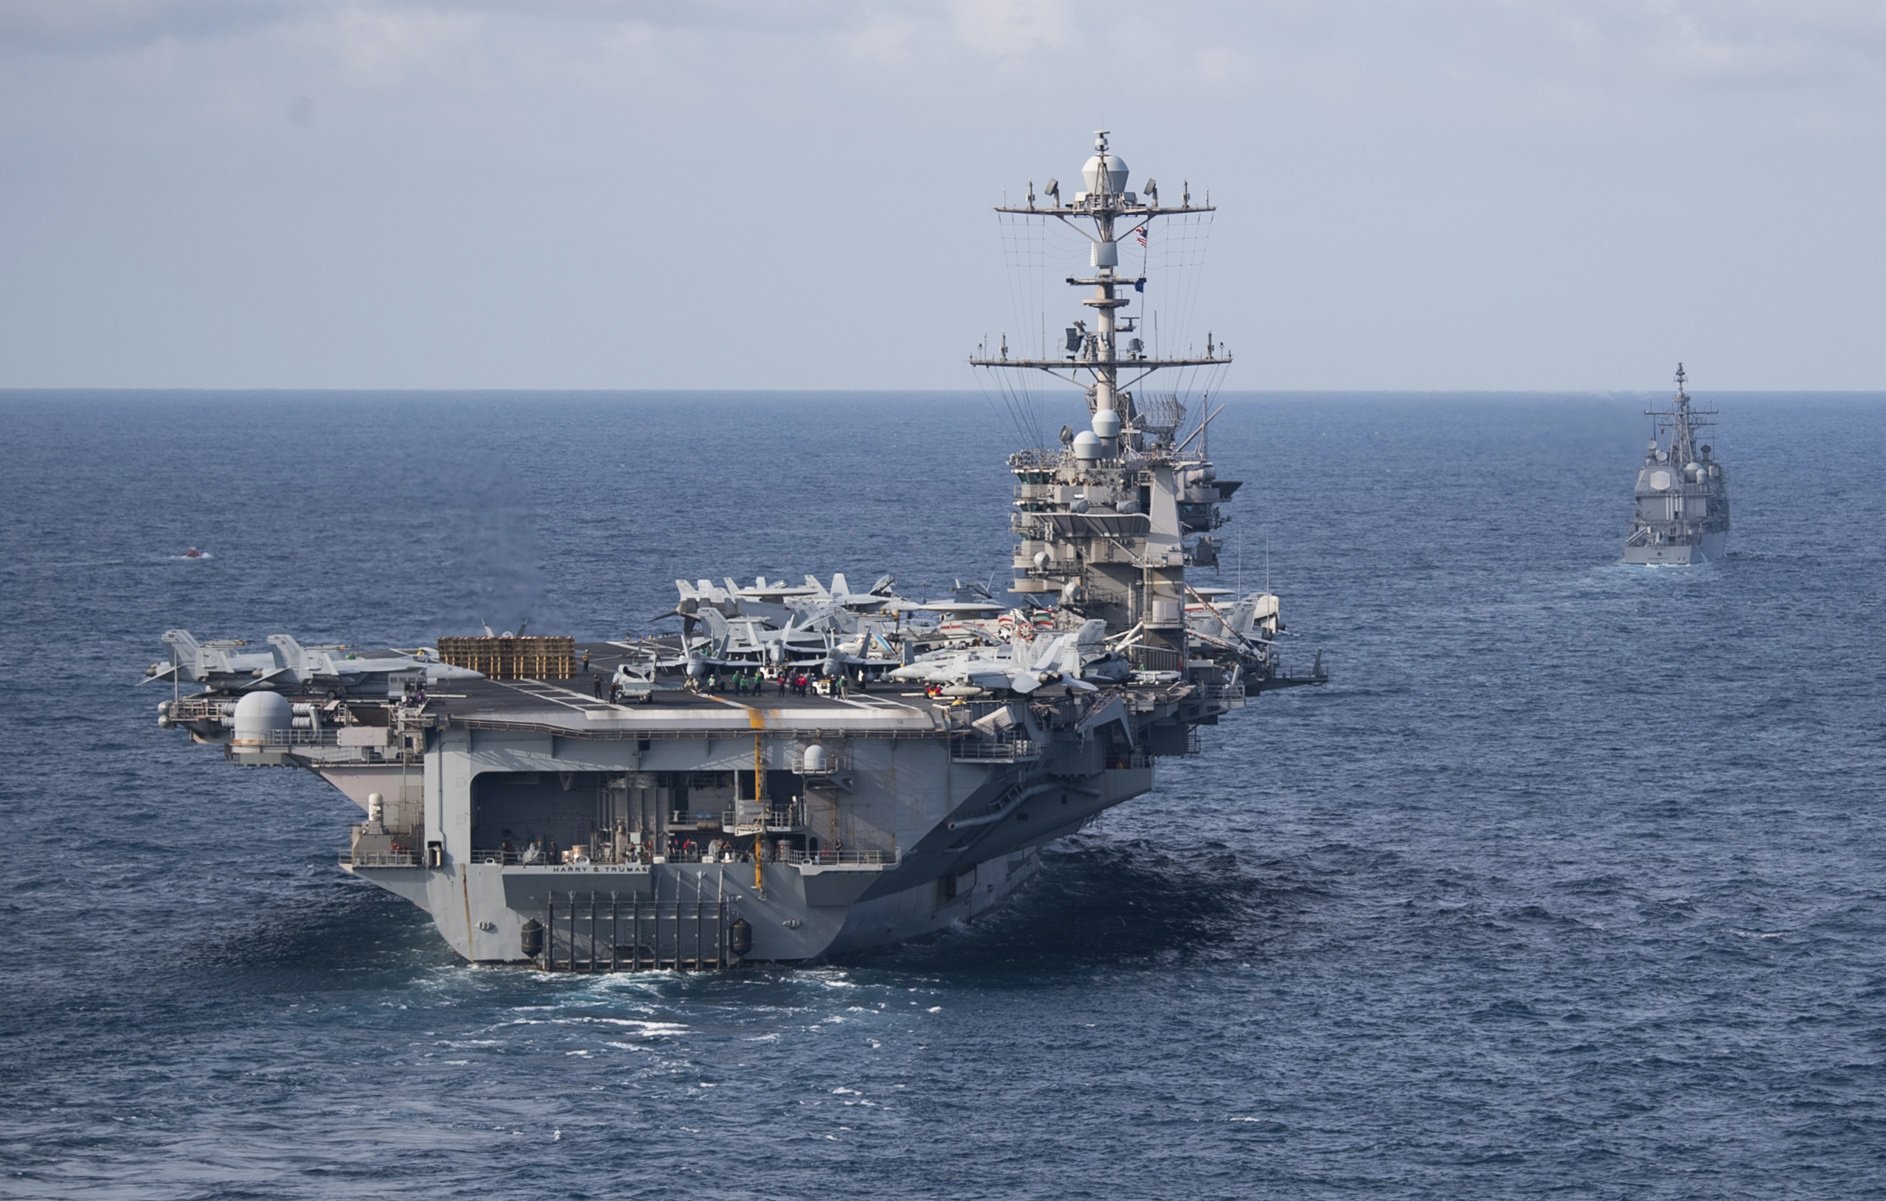 ATLANTIC OCEAN (July 18, 2019) The Nimitz-class aircraft carrier USS Harry S. Truman (CVN 75), front, and the Ticonderoga-class guided-missile cruiser USS Normandy (CG 60) transit the Atlantic Ocean. Harry S. Truman is underway conducting composite training unit exercise with the Harry S. Truman Carrier Strike Group. U.S. Navy photo by Mass Communication Specialist 2nd Class Scott Swofford/Released.